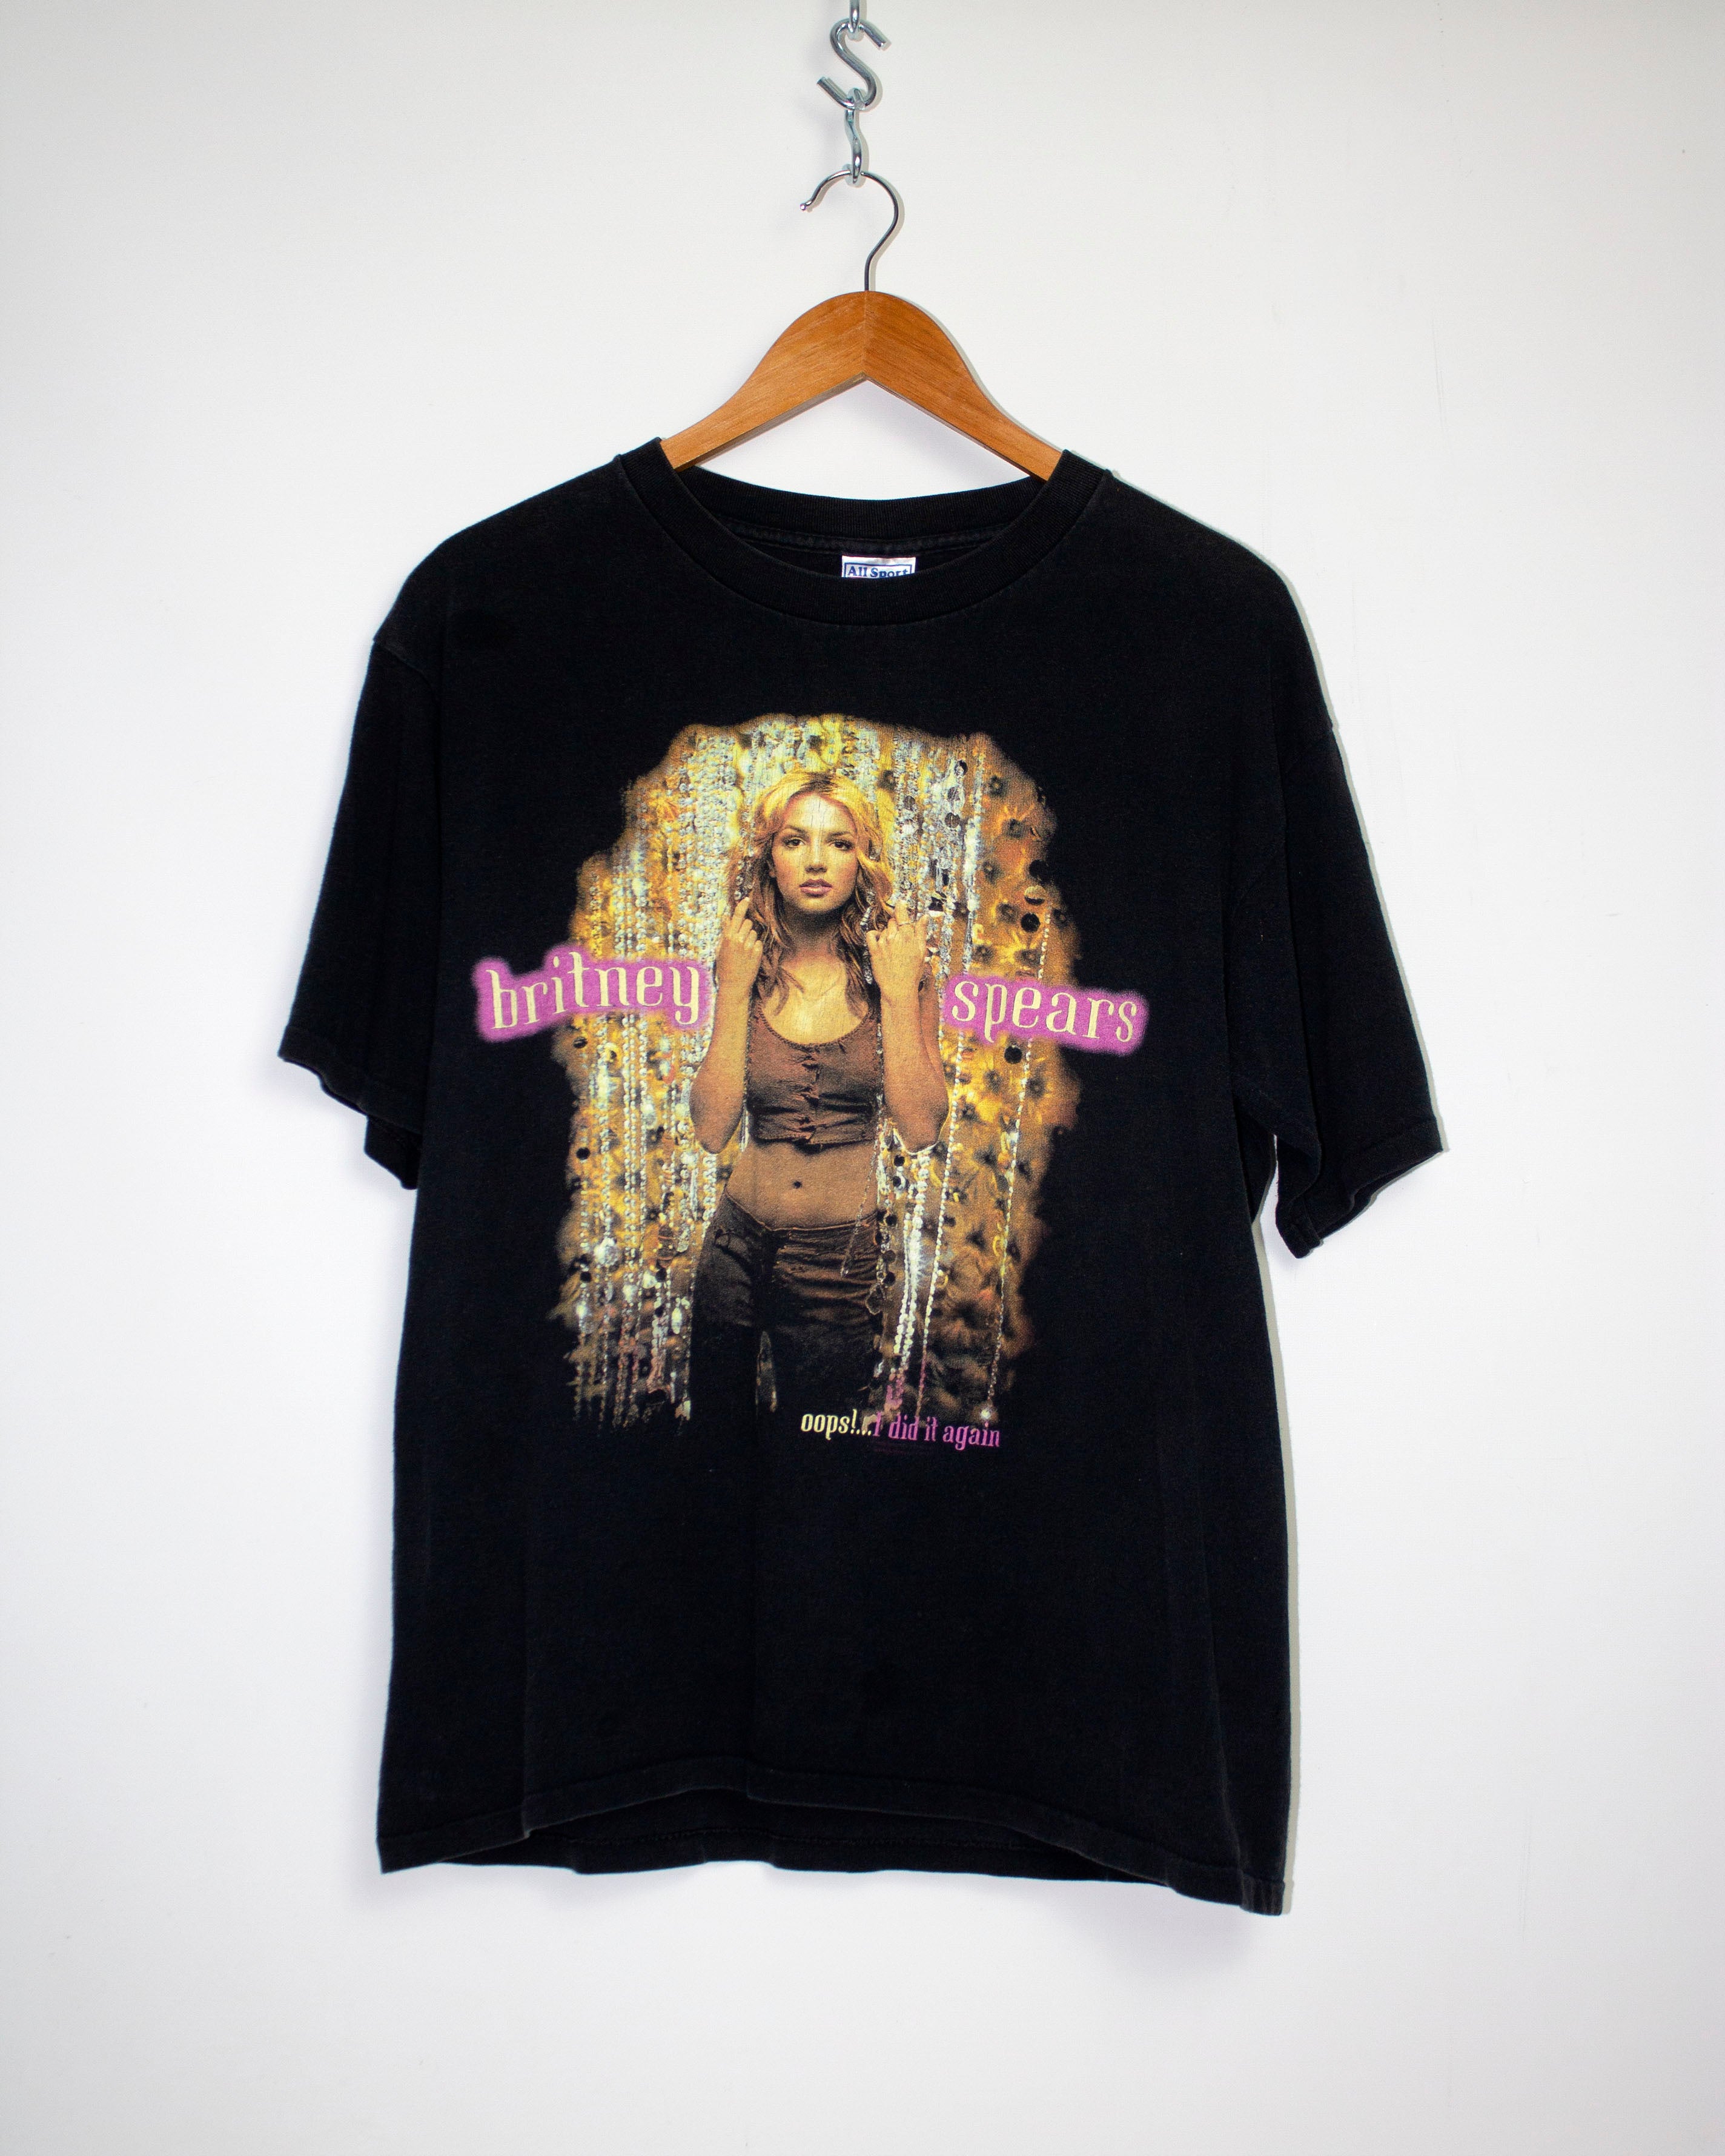 Vintage Britney Spears Oops I Did It Again Tour T-Shirt Sz L